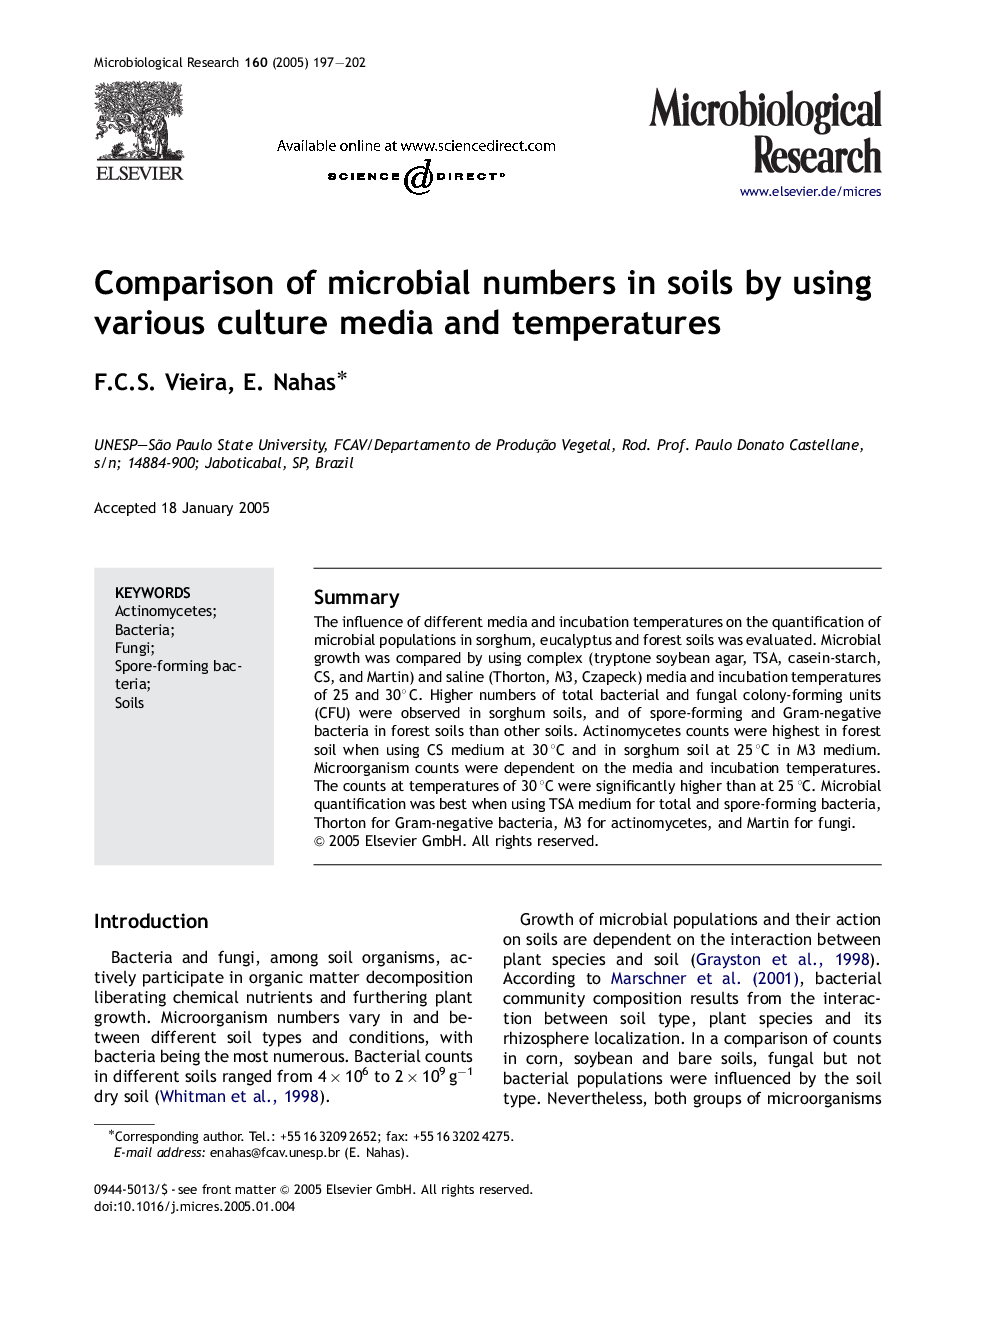 Comparison of microbial numbers in soils by using various culture media and temperatures